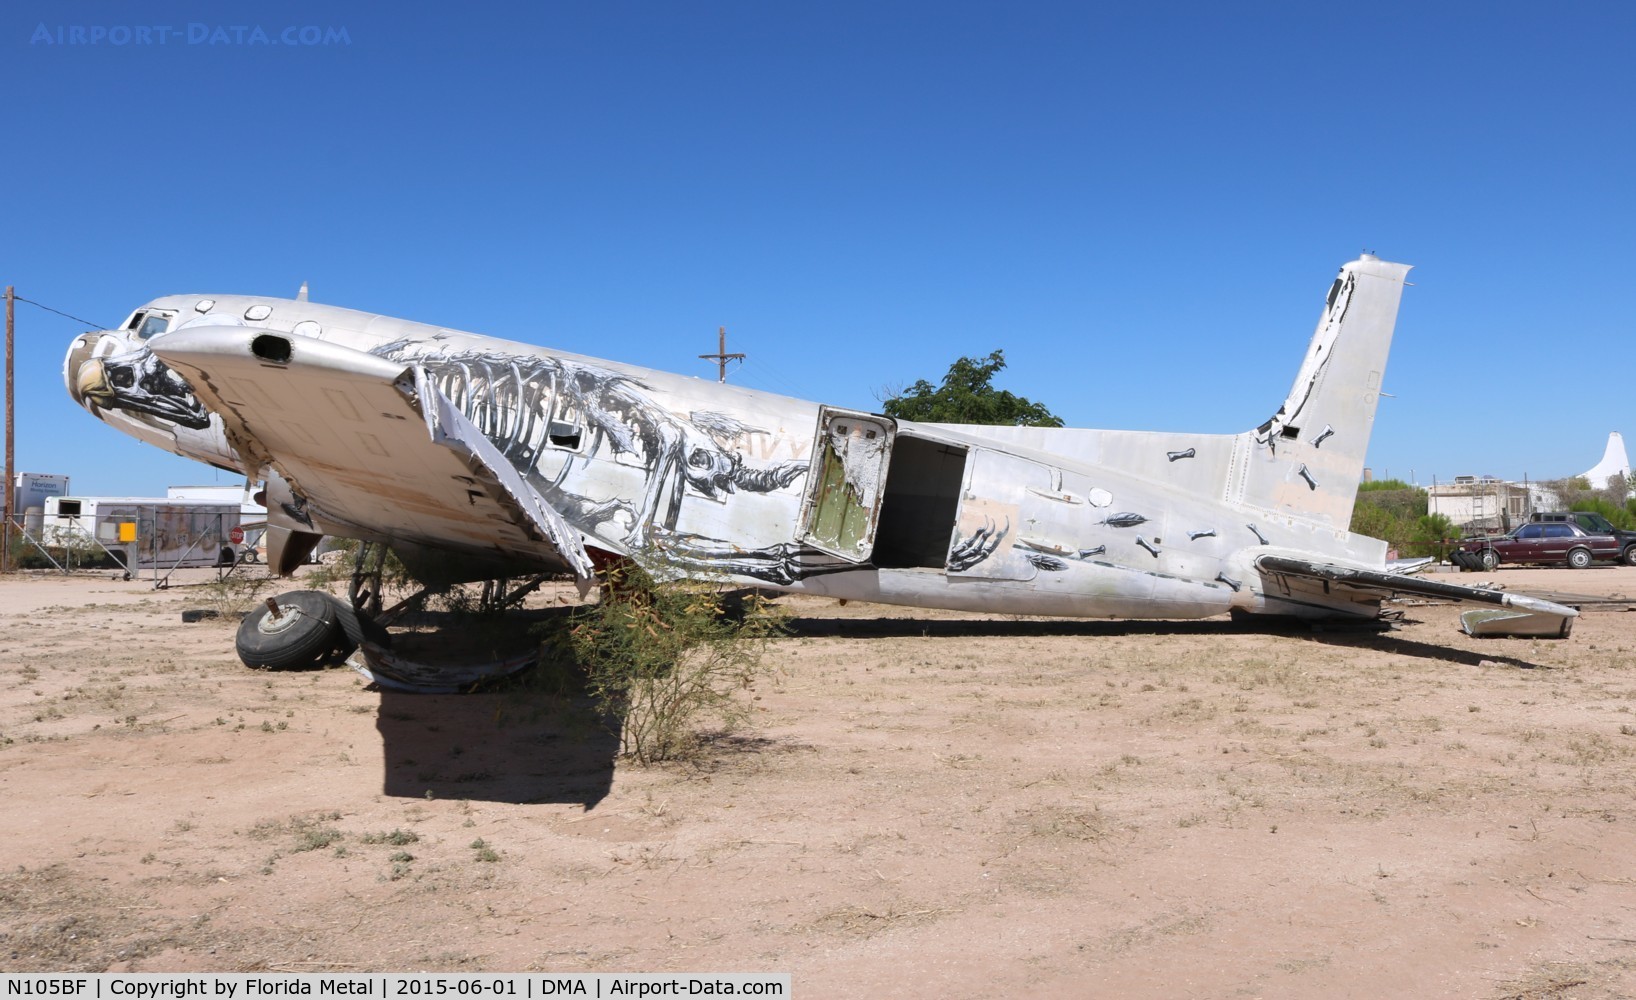 N105BF, Douglas C-117D C/N 12441, C-117D on some private boneyard property (that I was able to legally explore) by Davis Monthan AFB, this aircraft was painted in art like some of the ones at PIMA but never got used